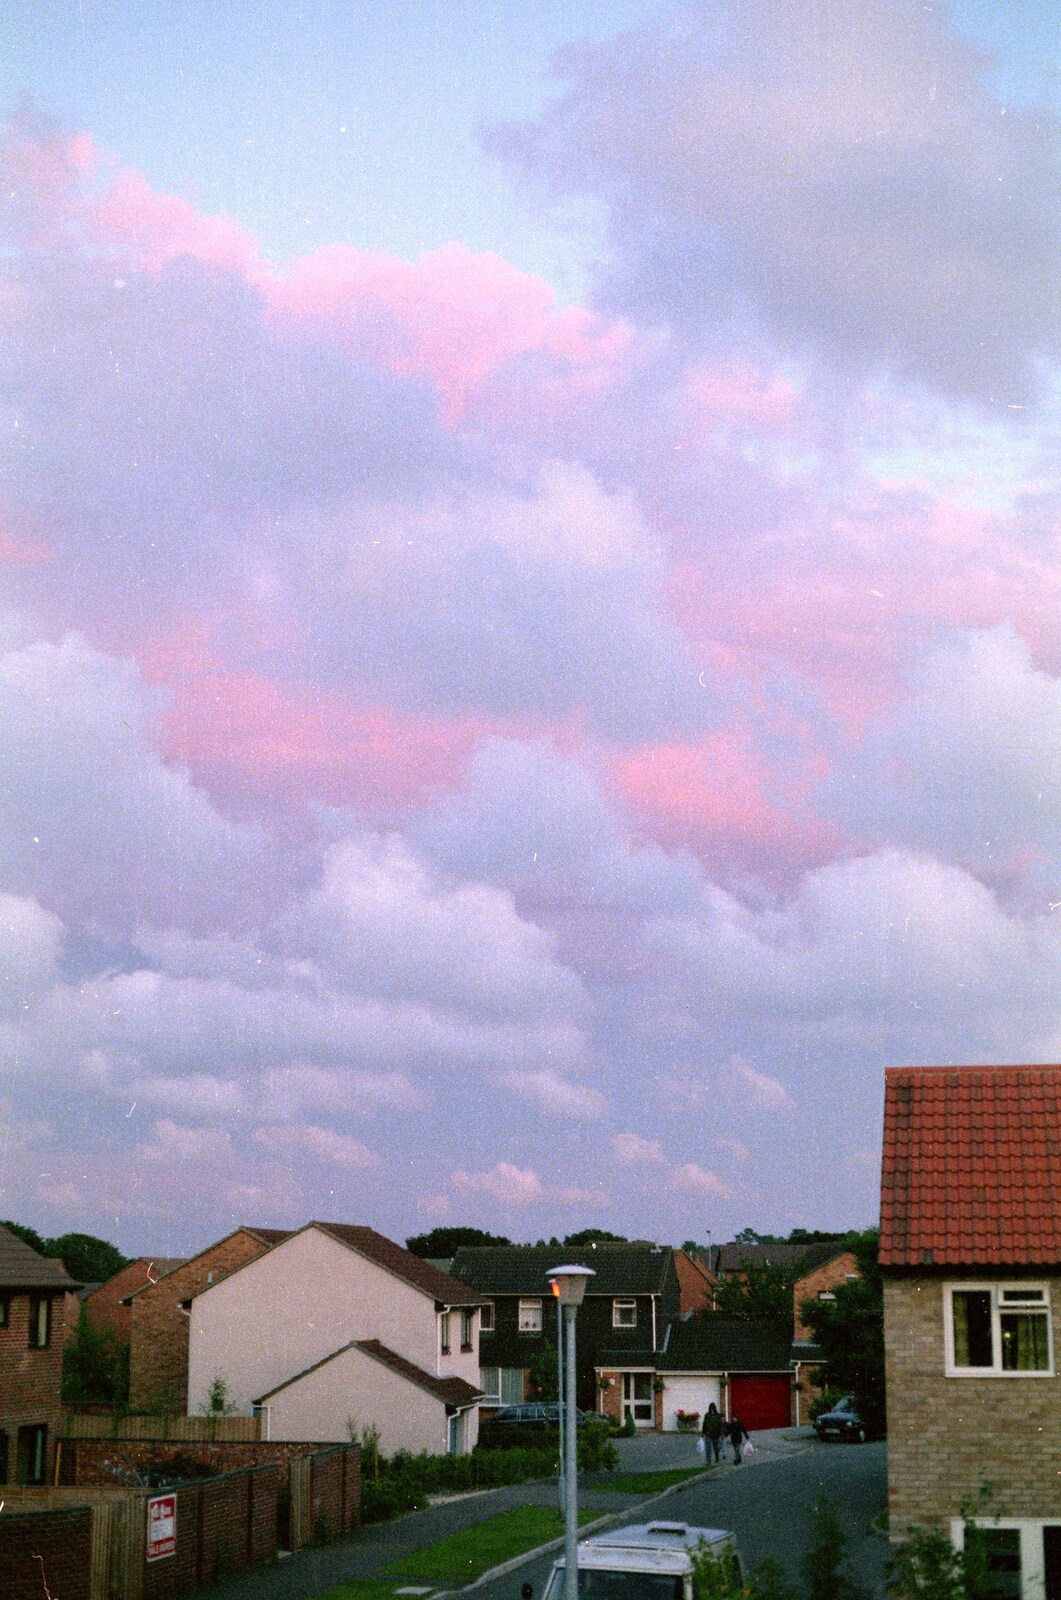 A pink and purple sunset over Harvester Way from Harvester Way Randomness, Lymington, Hampshire - 19th July 1986